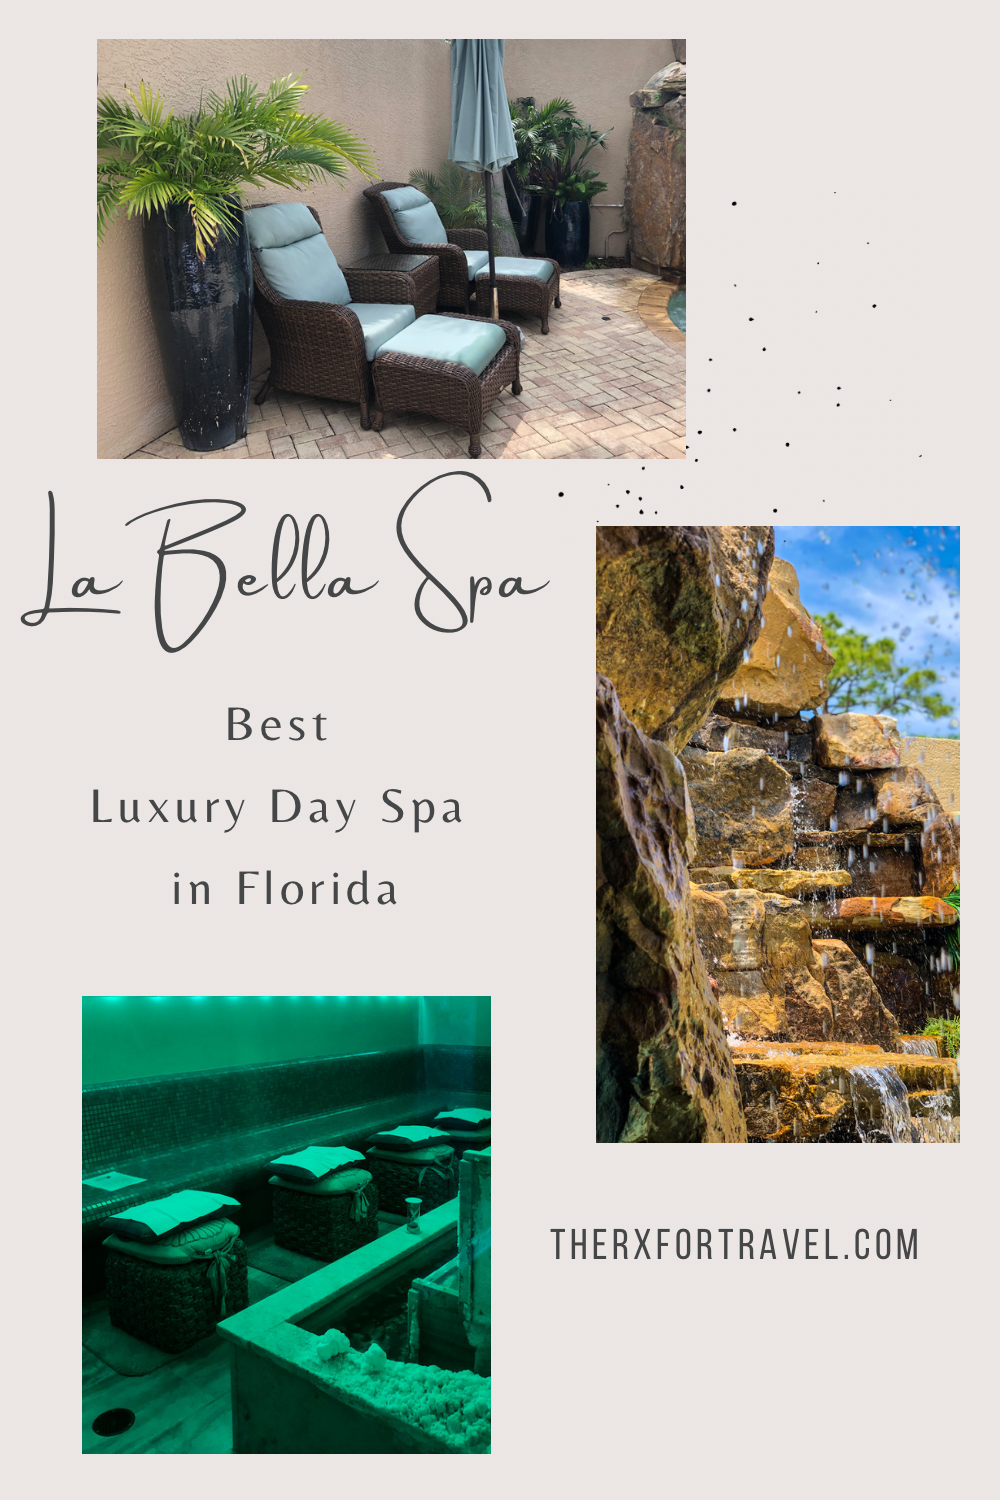 Check out this luxury day spa in Florida, La Bella Spa